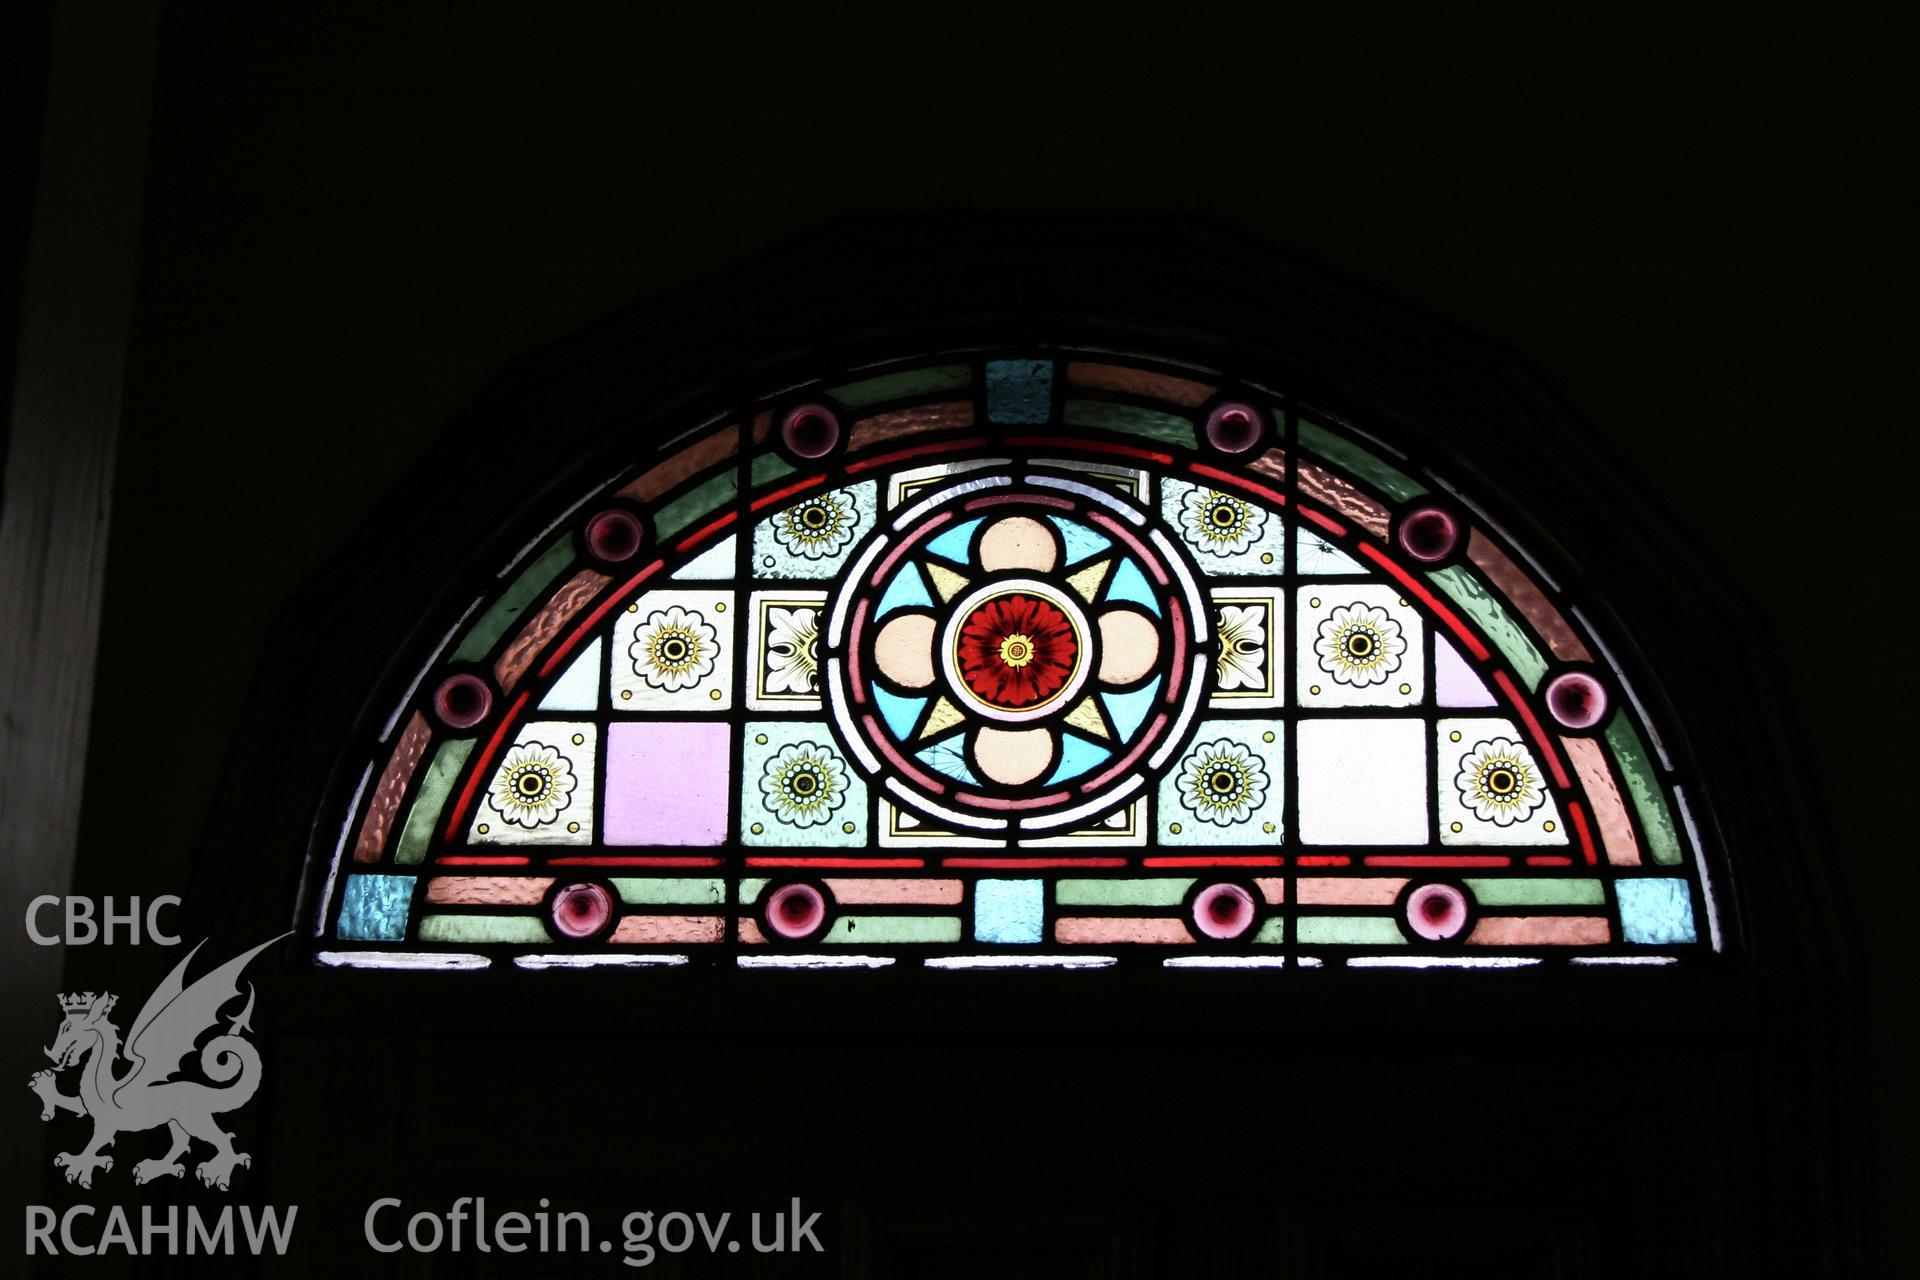 Internal, stained glass detail